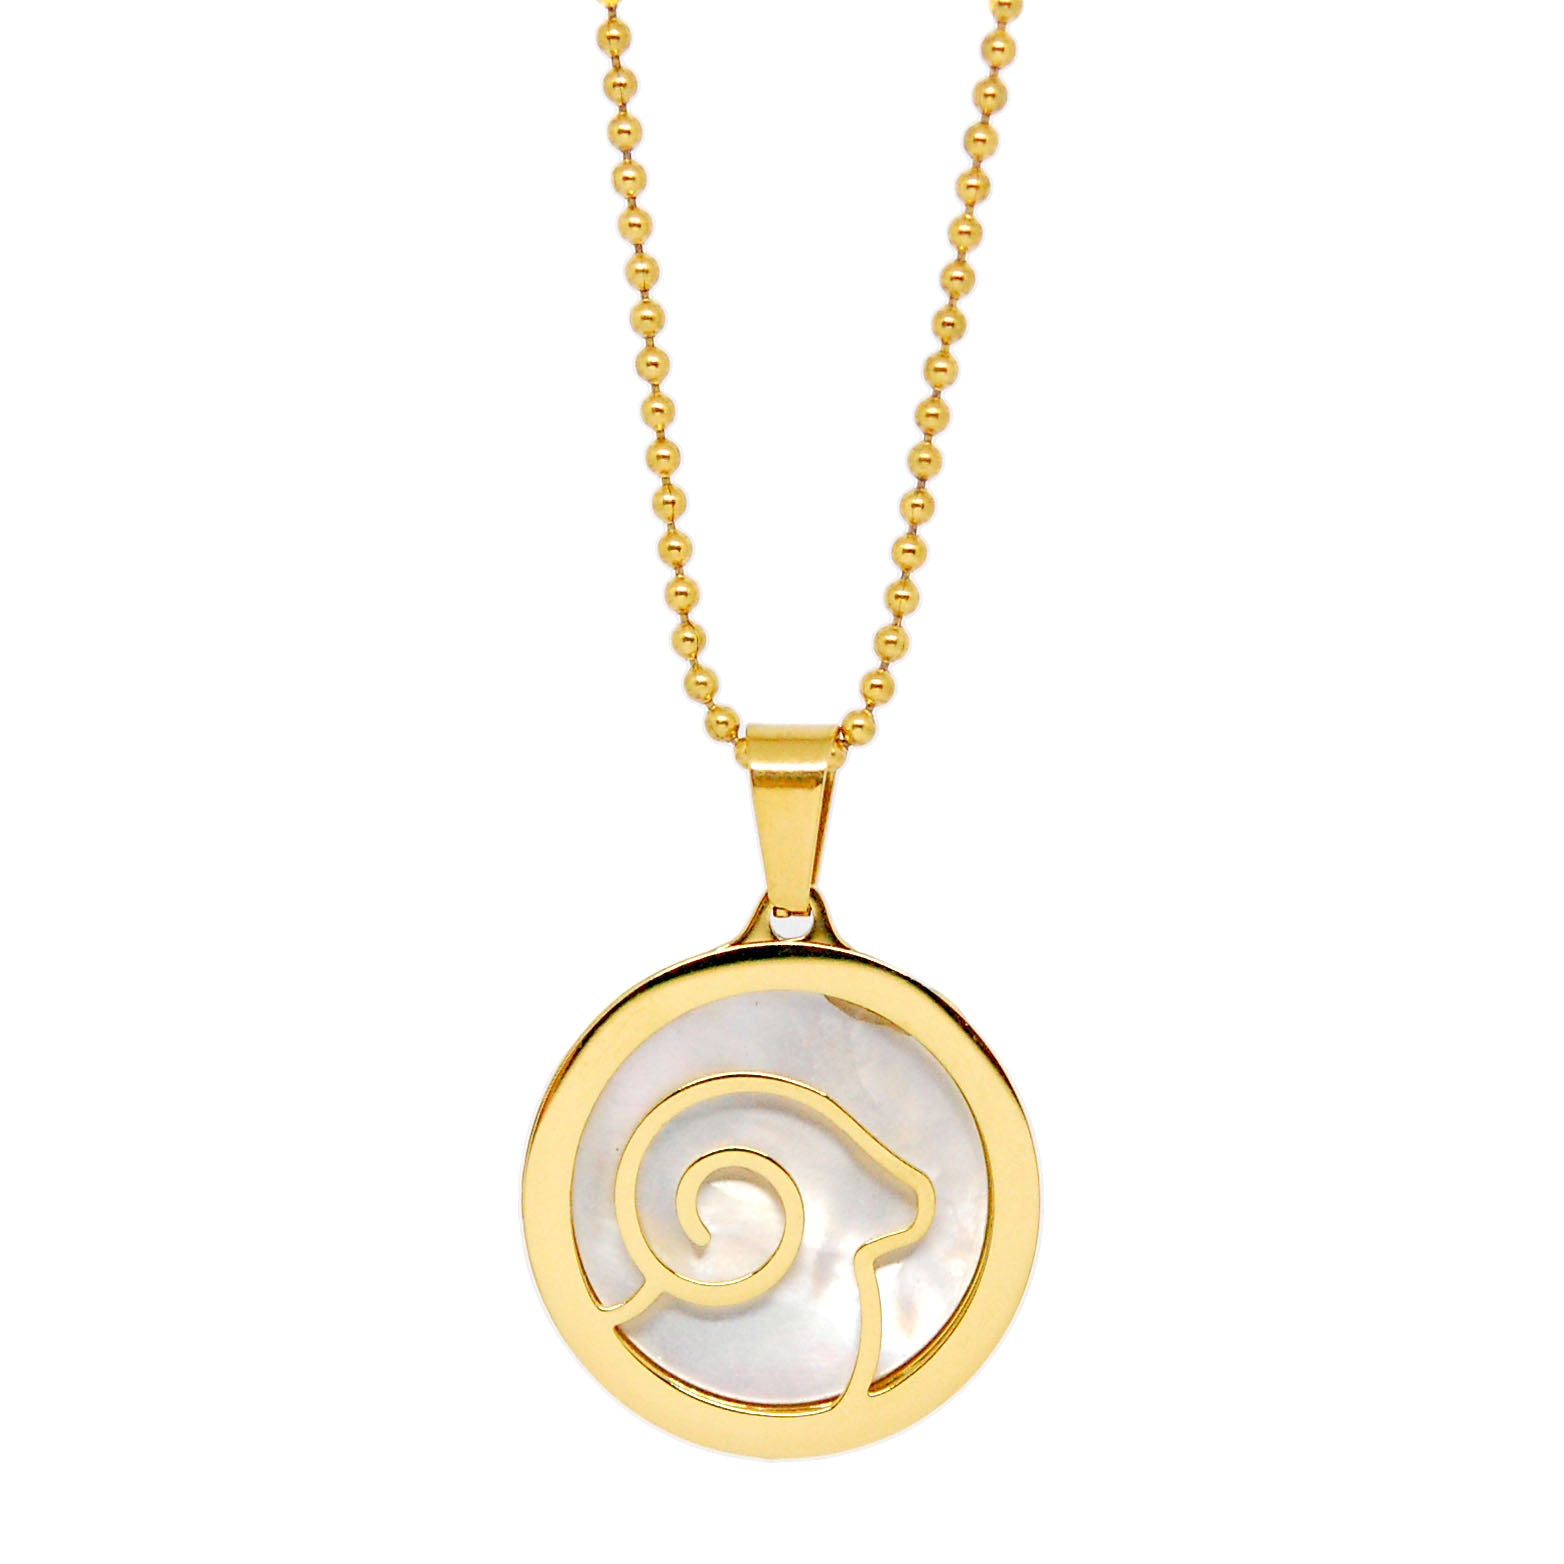 ESN 7969: All IPG Mop Aries Zodiac Necklace w/ 18" IPG Ball Chain